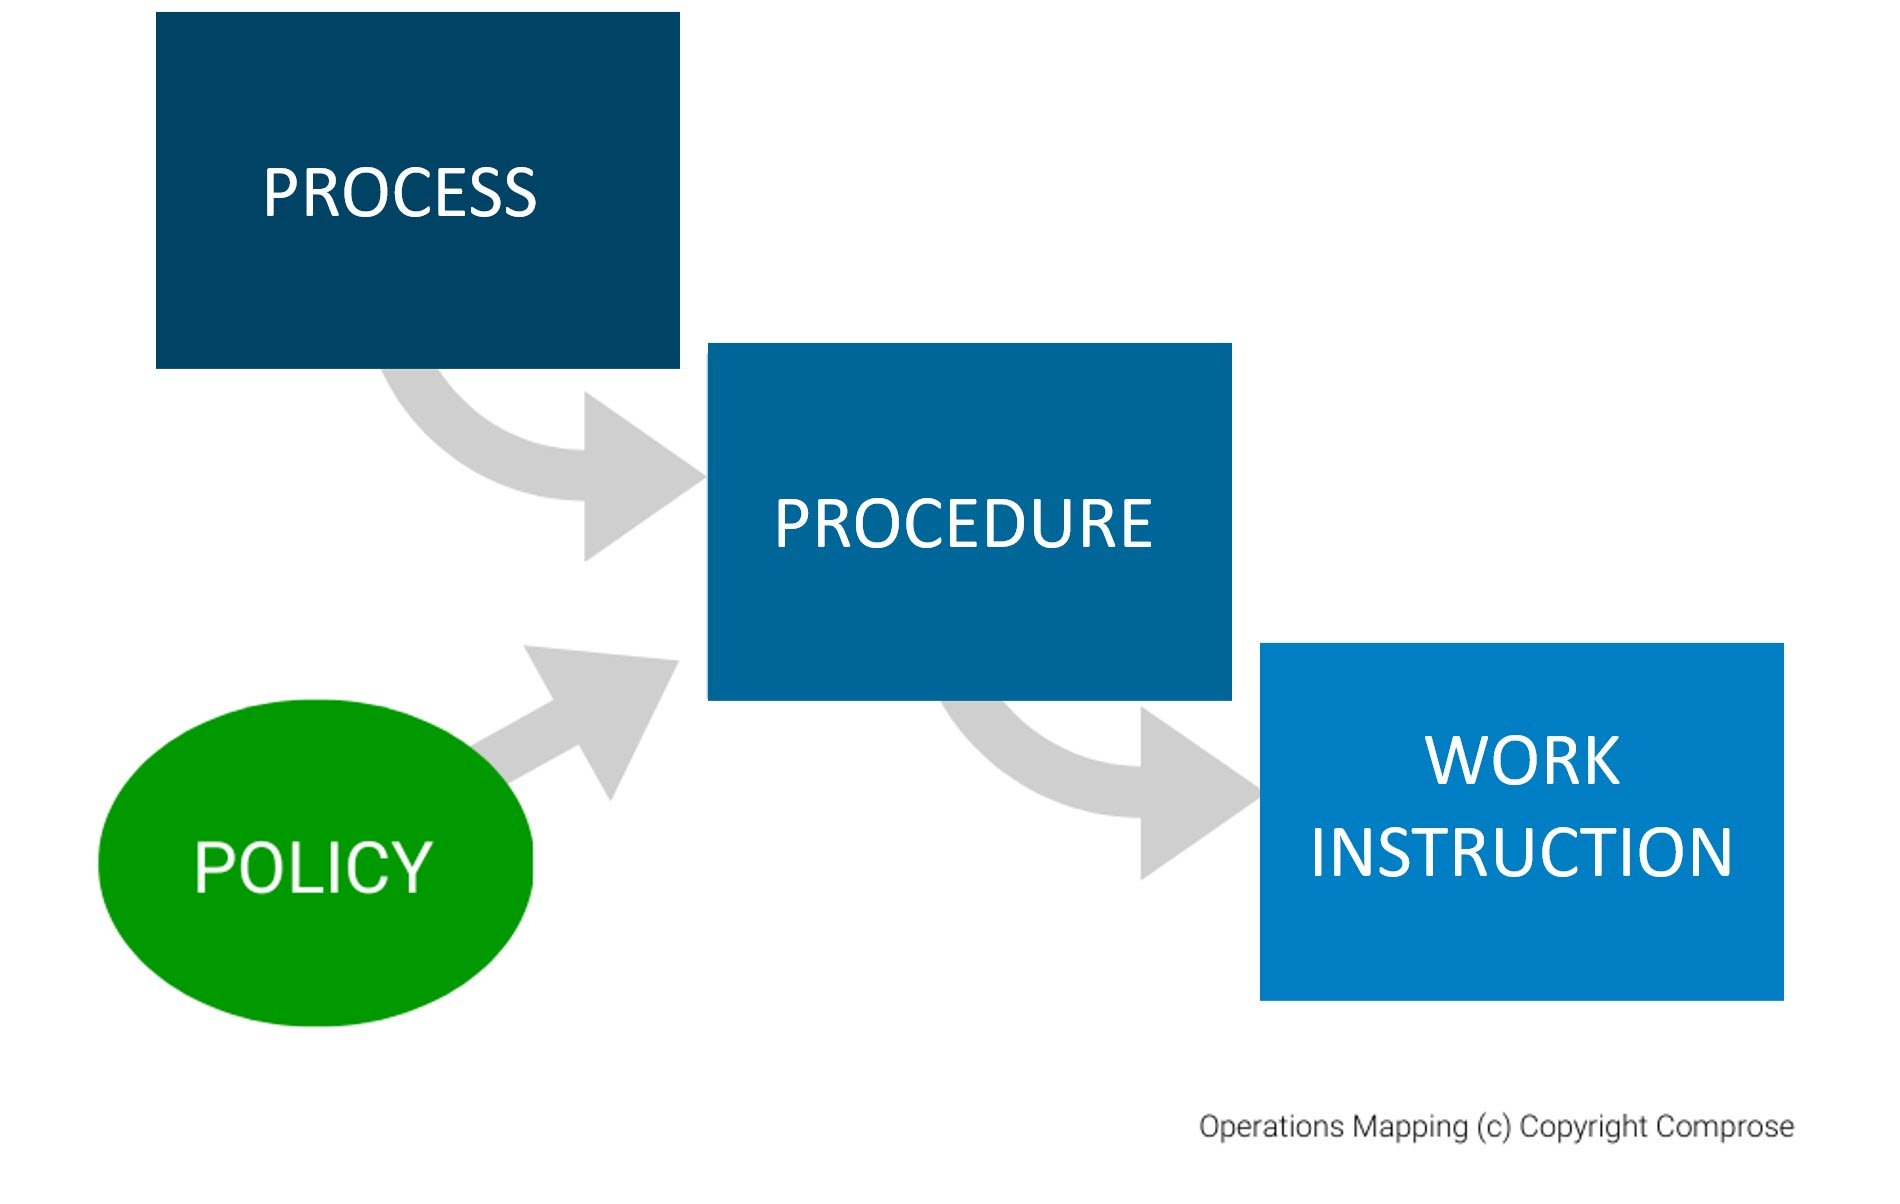 Difference Between Policy, Procedure, Work Instructions